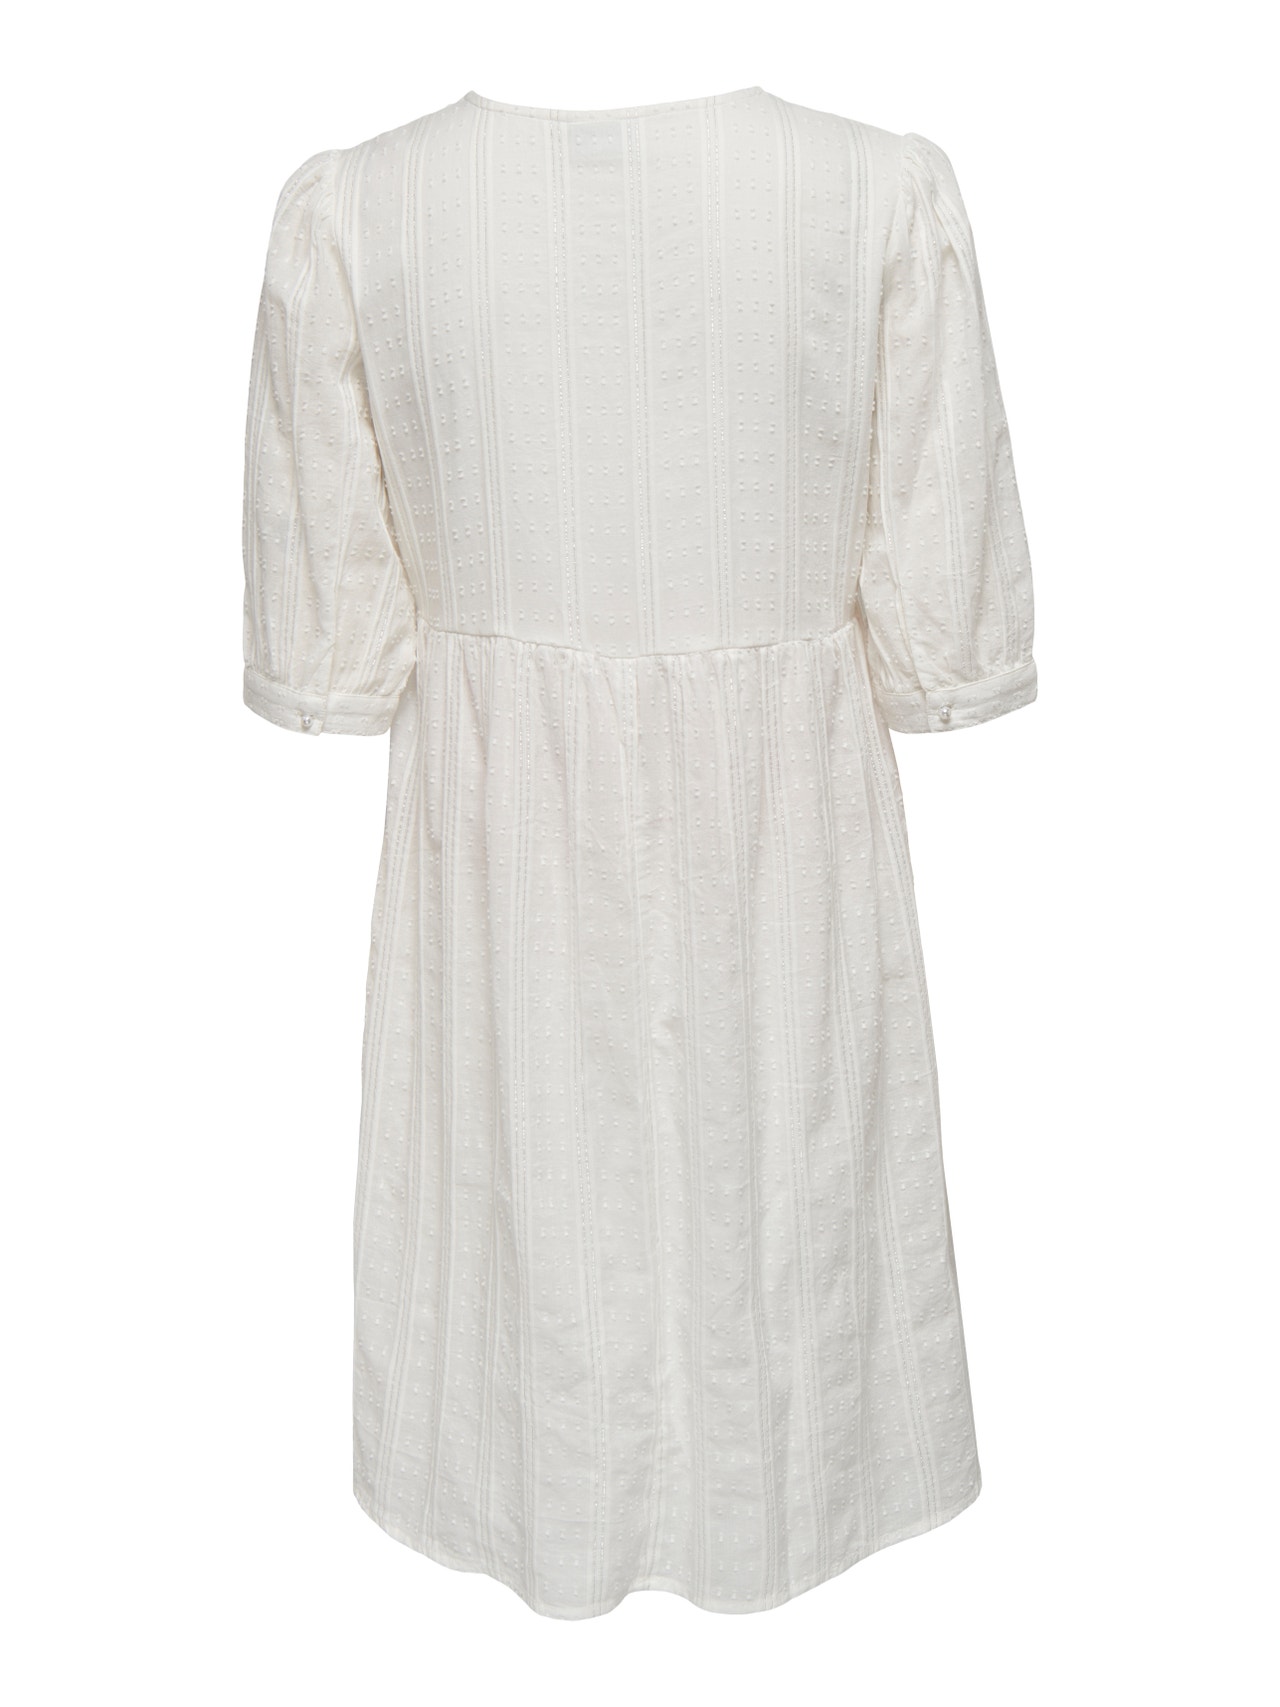 ONLY Mama 3/4 sleeved button tunic Dress -Cloud Dancer - 15268334